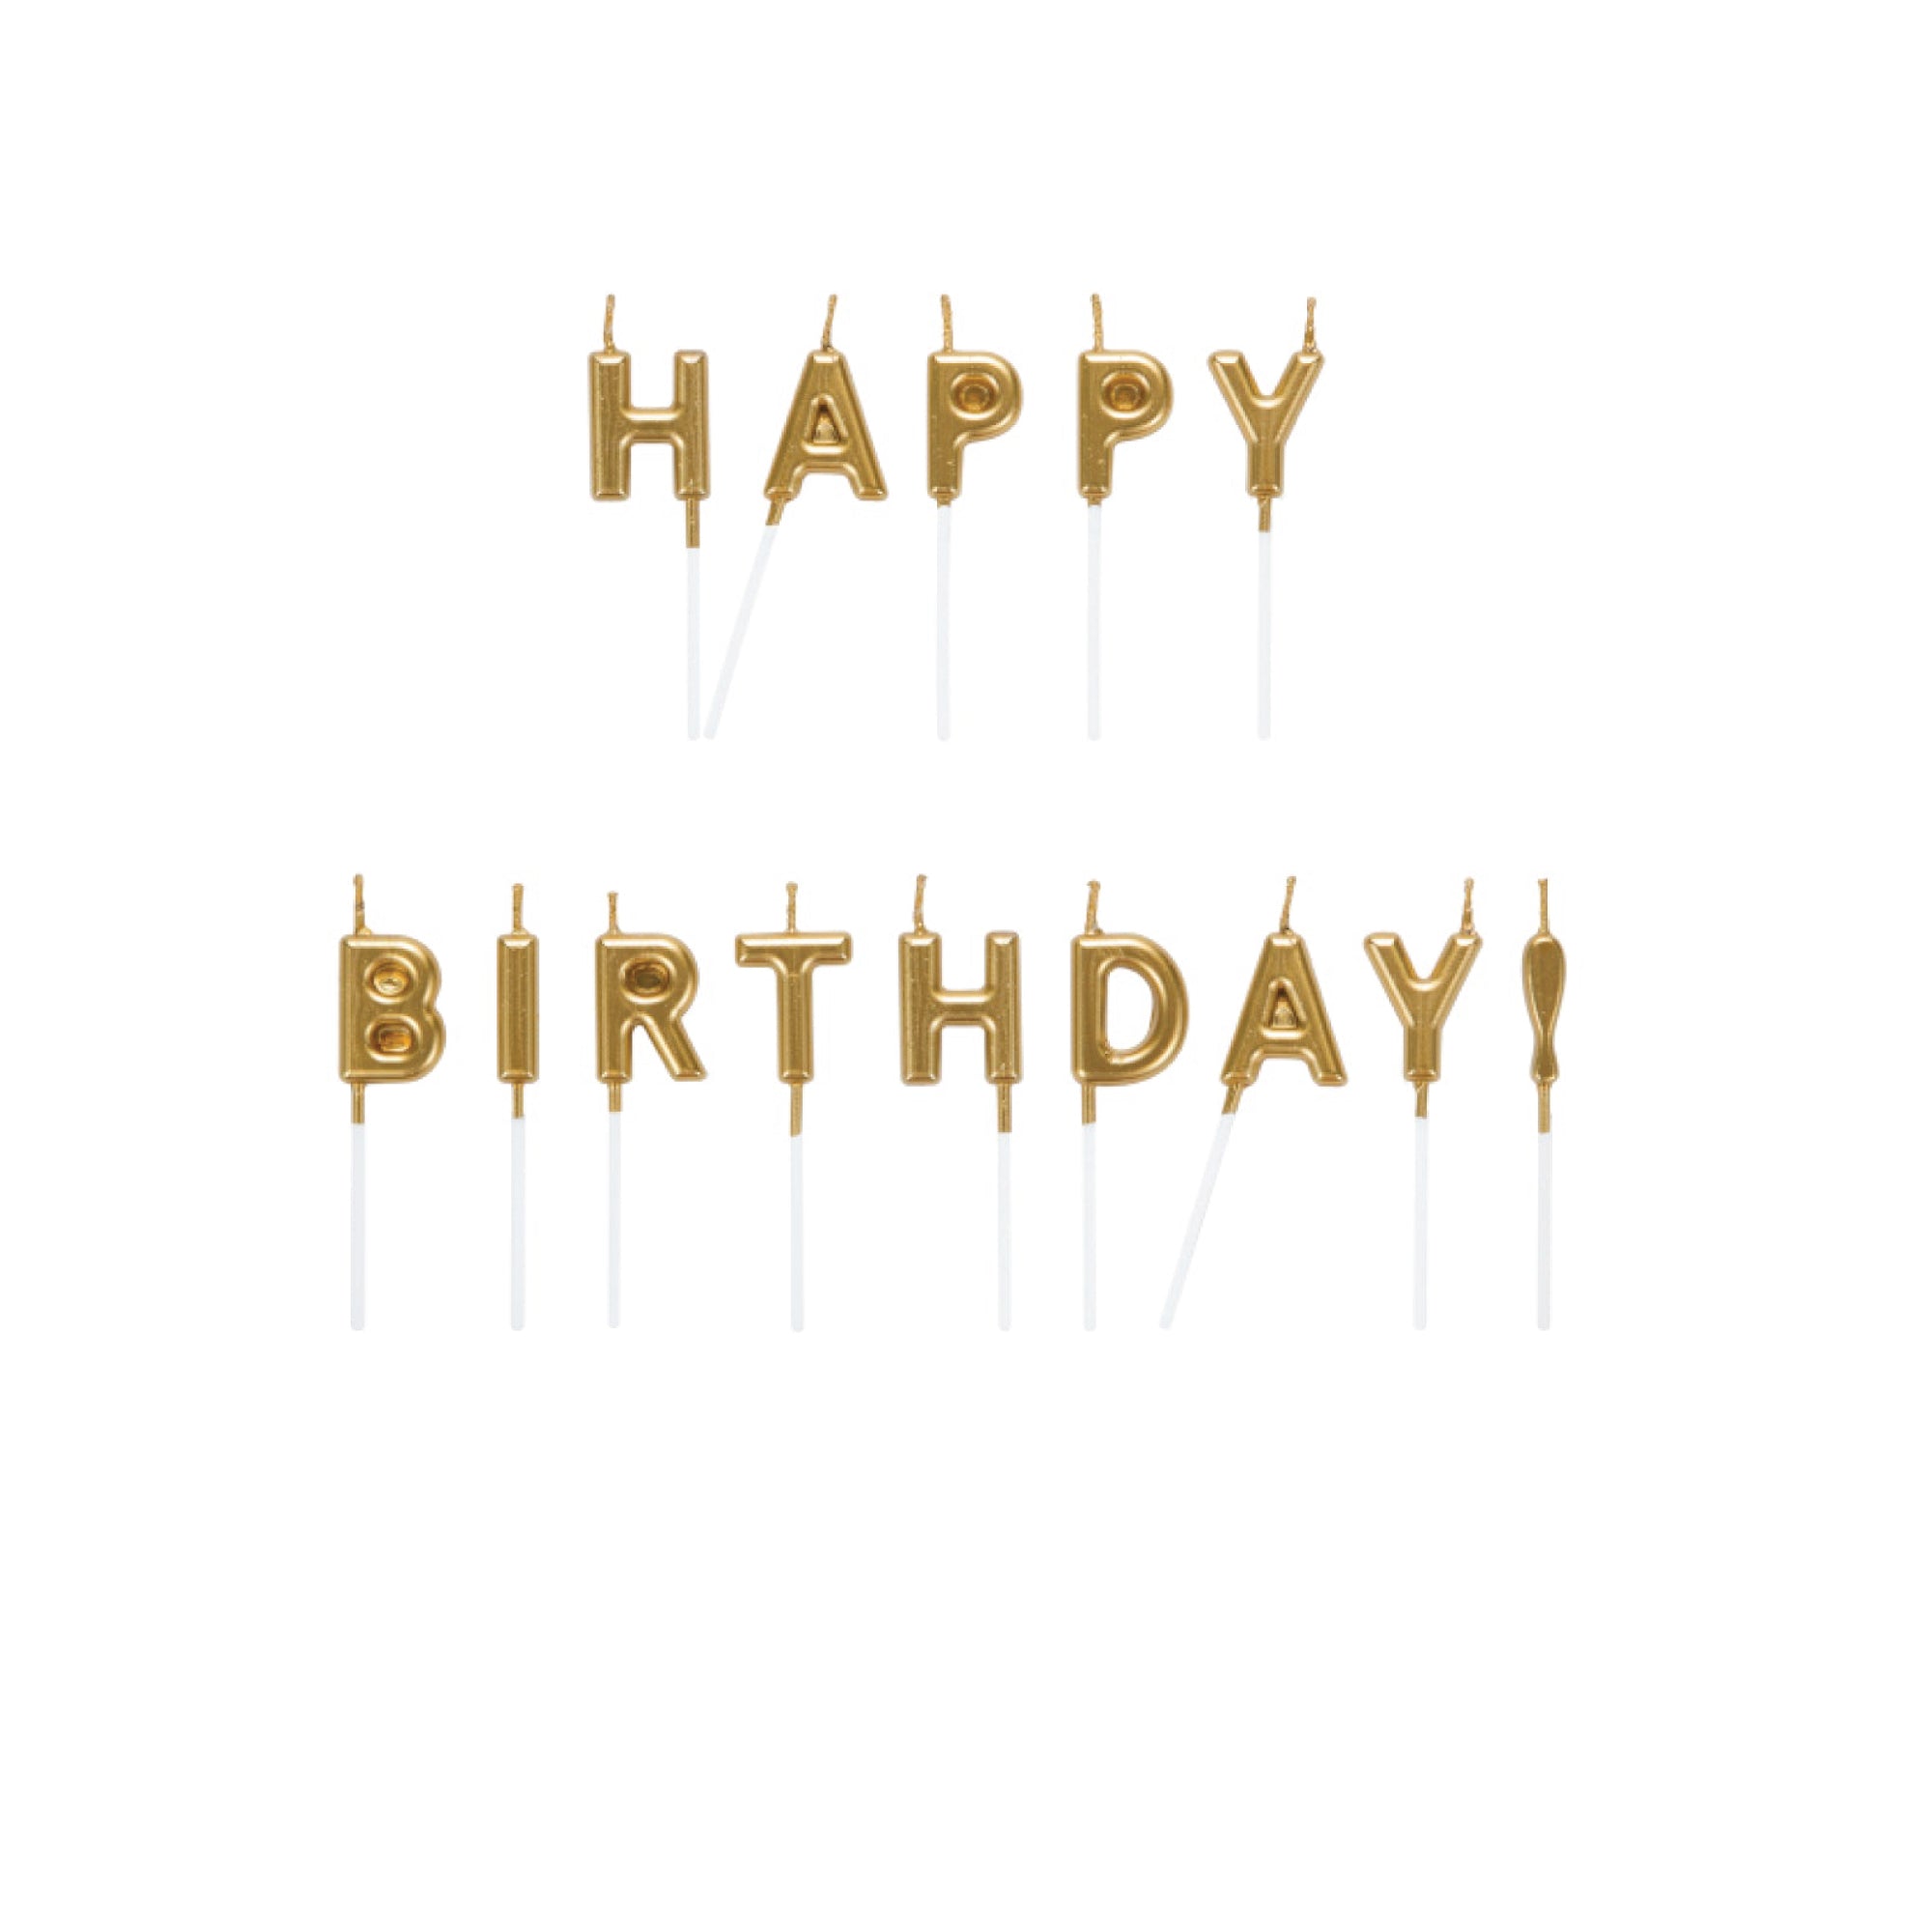 Gold Happy Birthday Candle Set 14ct | The Party Darling